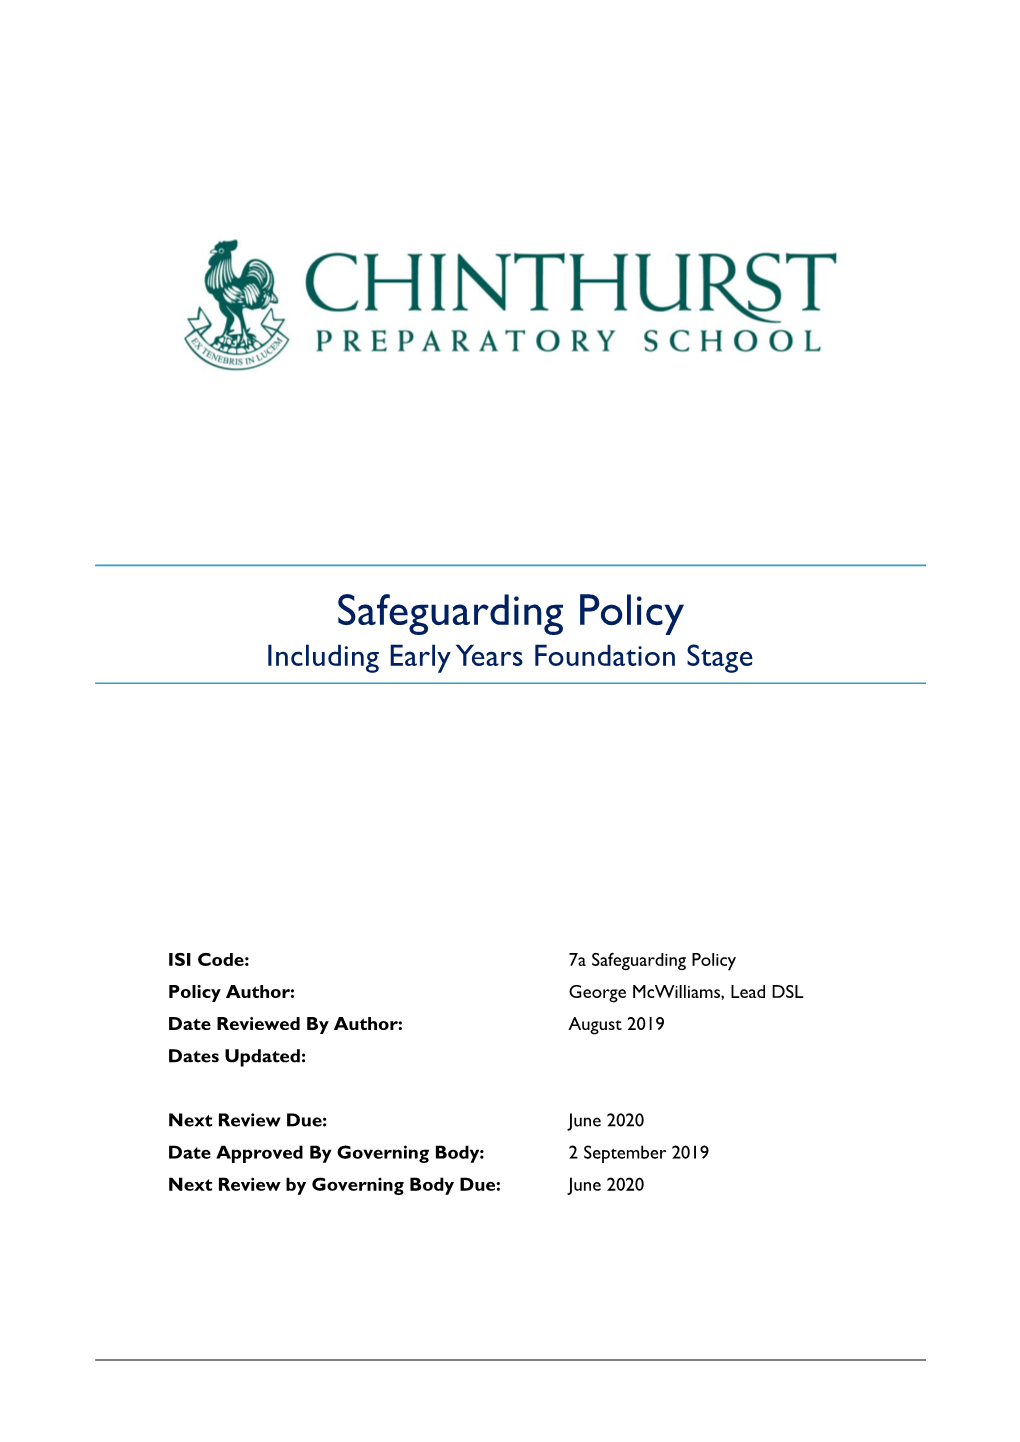 Safeguarding Policy Including Early Years Foundation Stage